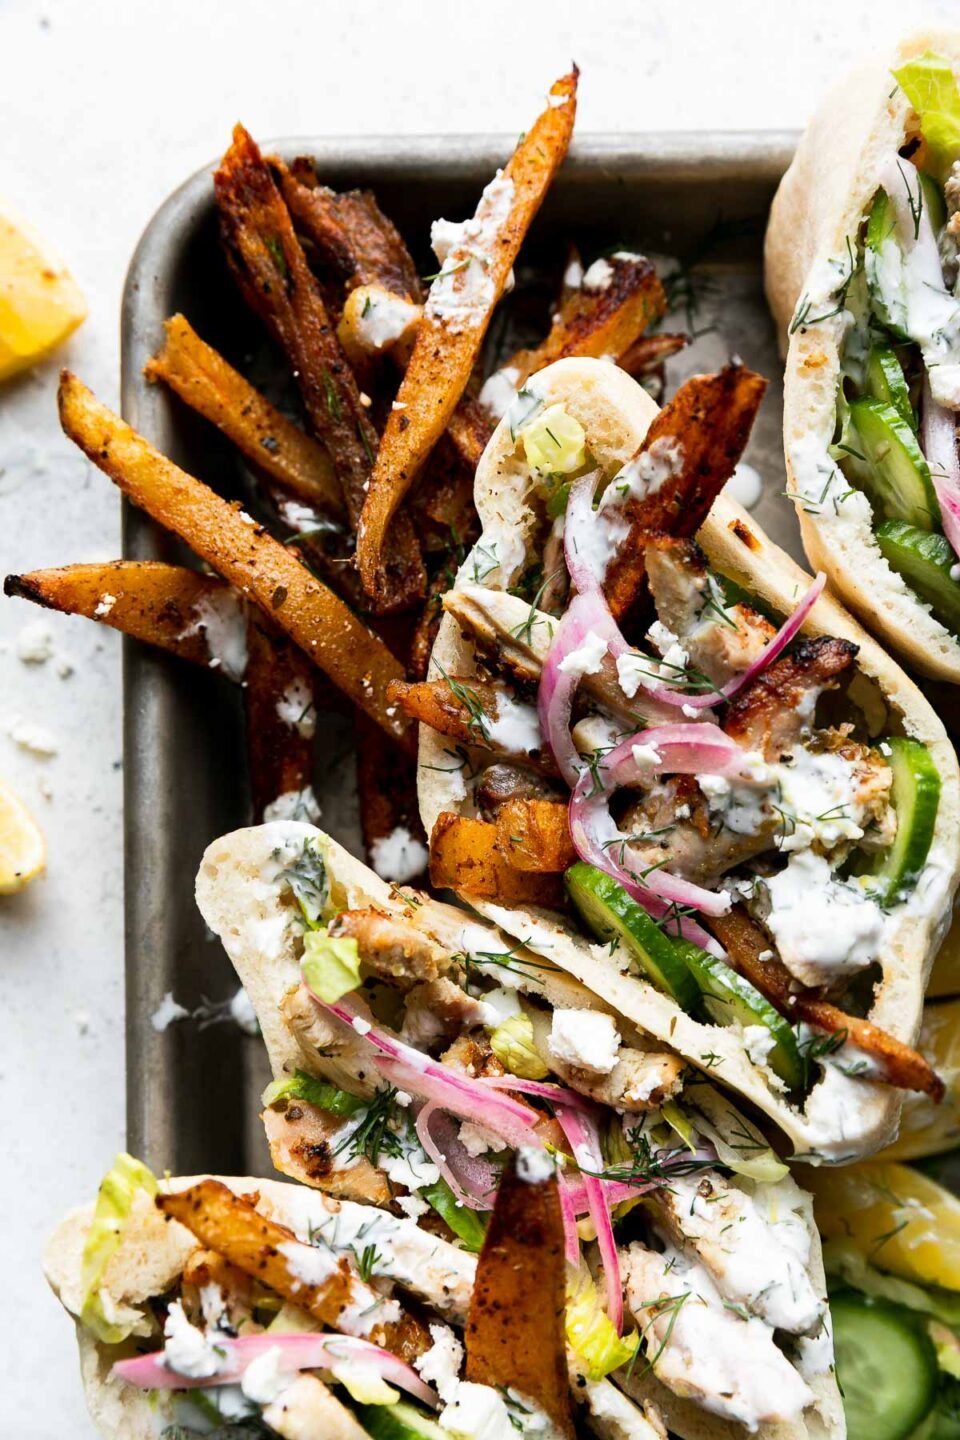 Four Lemony Greek Chicken Pita sandwiches arranged on a small baking sheet alongside a small pile of oven-roasted Greek fries, lemon wedges, and sliced cucumber. Lemon wedges and crumbled feta surround the baking sheet and all items sit atop a creamy white textured surface.